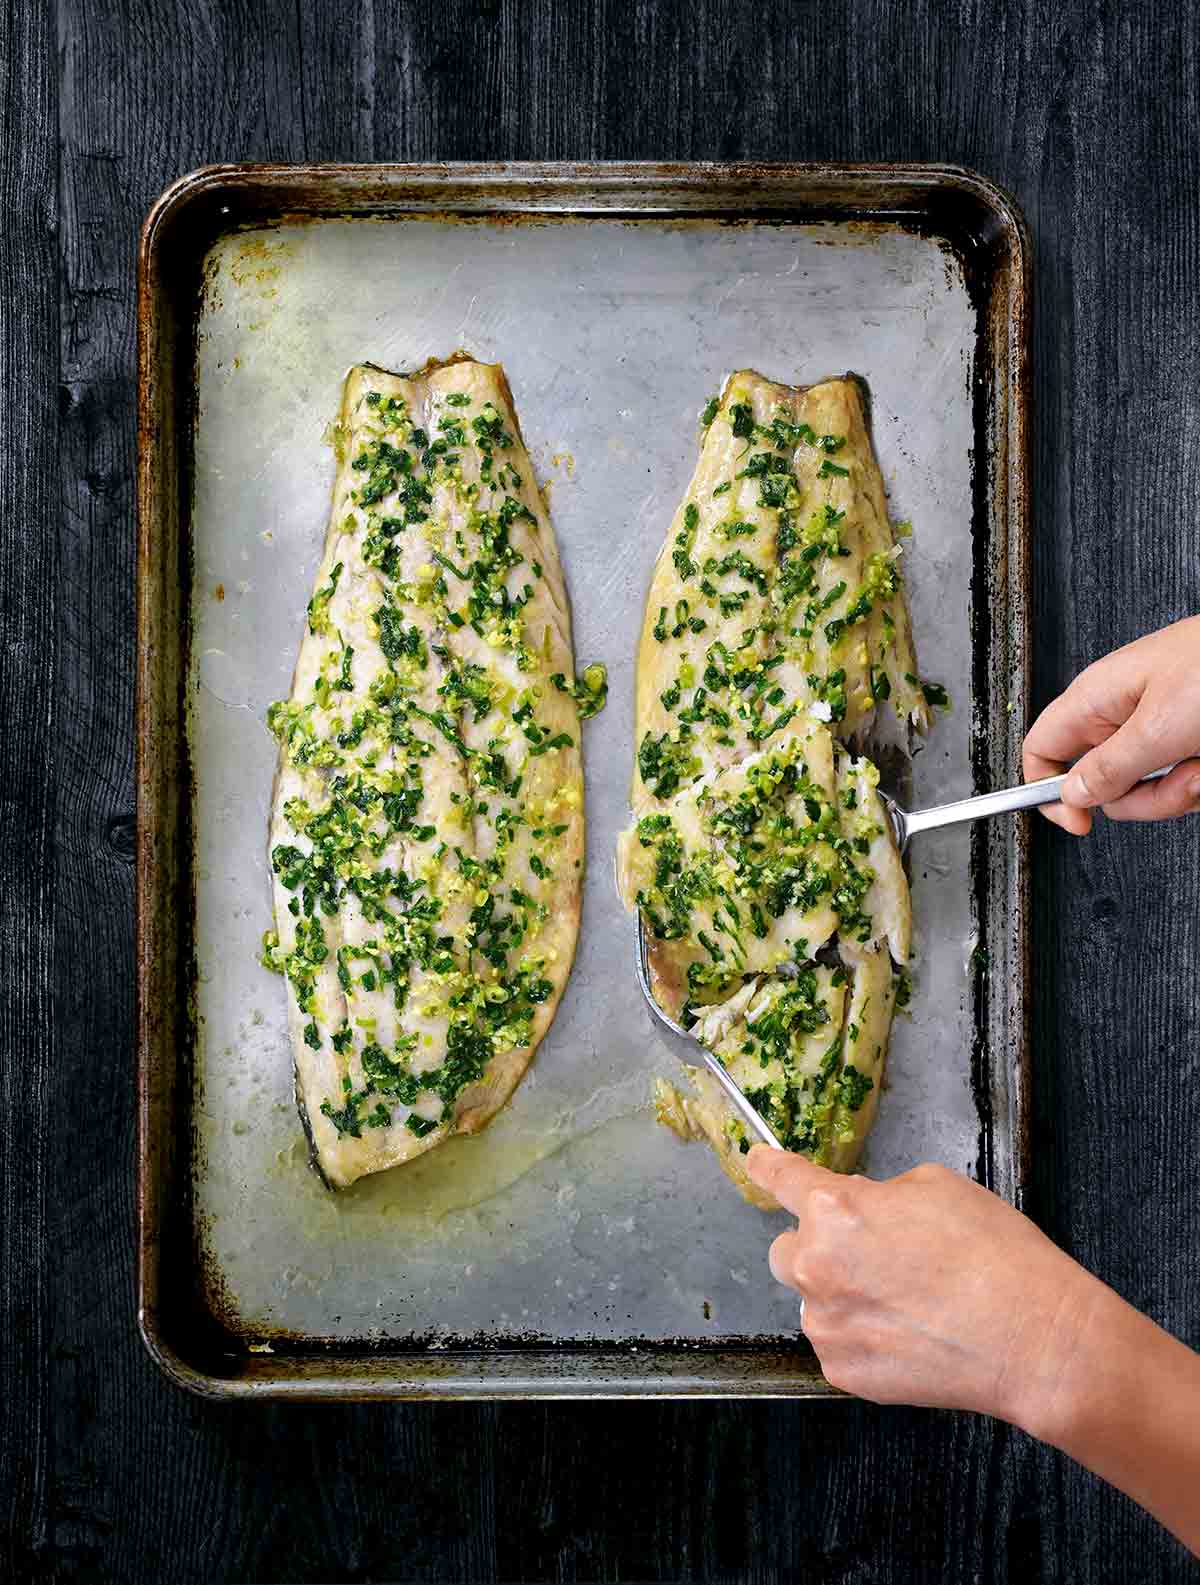 a woman's hands lifting ginger-scallion fish fillets from a baking sheet